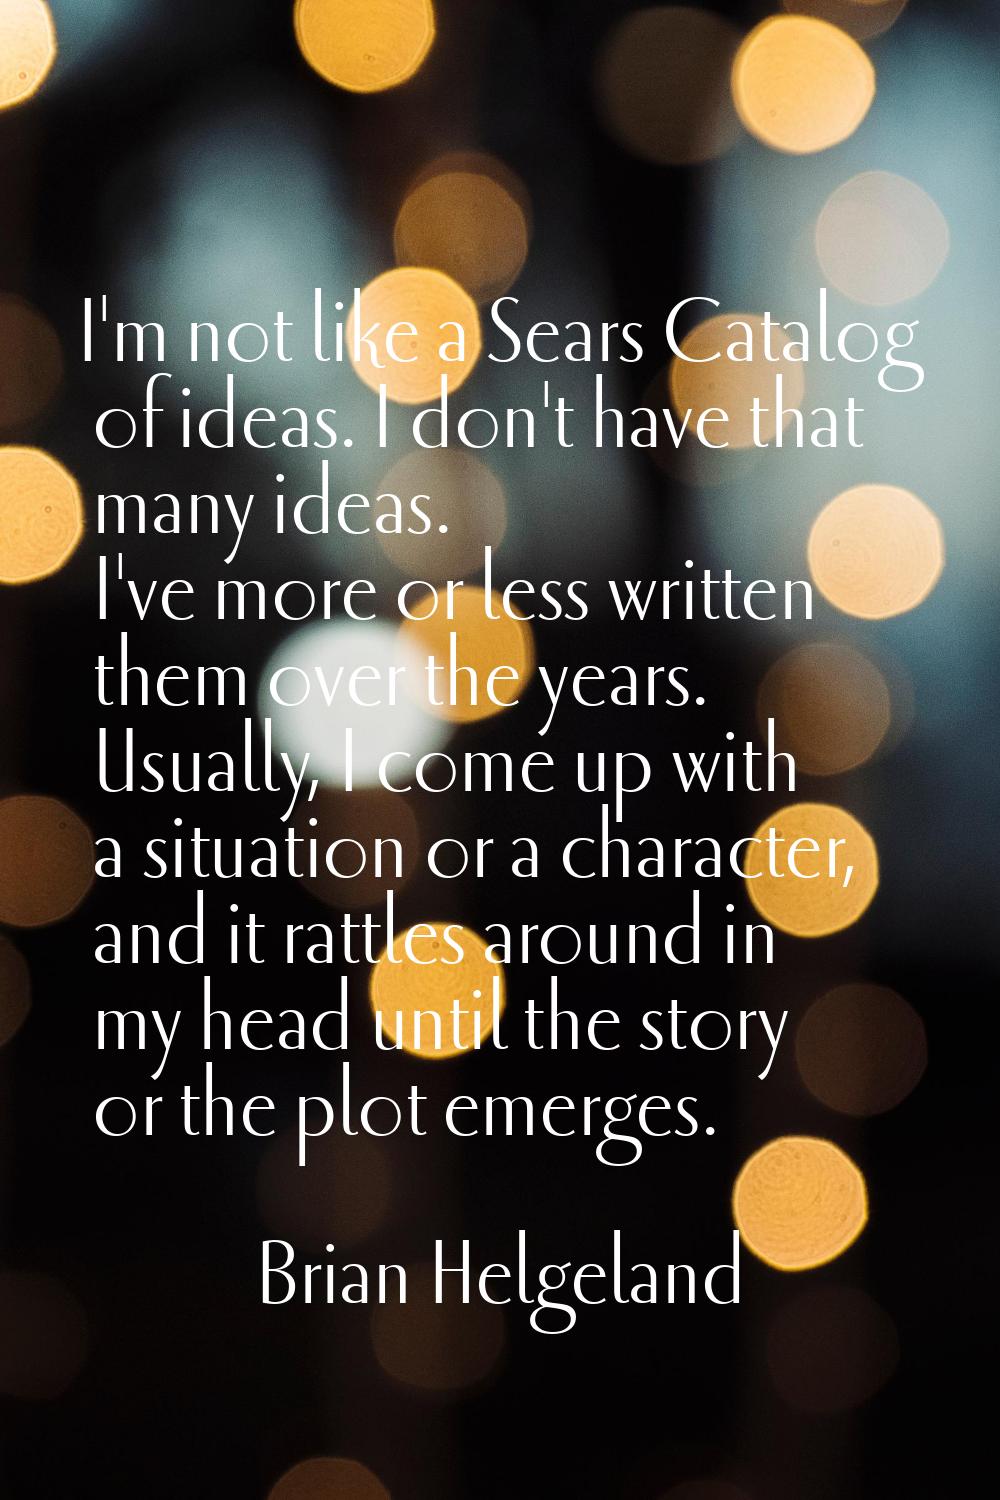 I'm not like a Sears Catalog of ideas. I don't have that many ideas. I've more or less written them